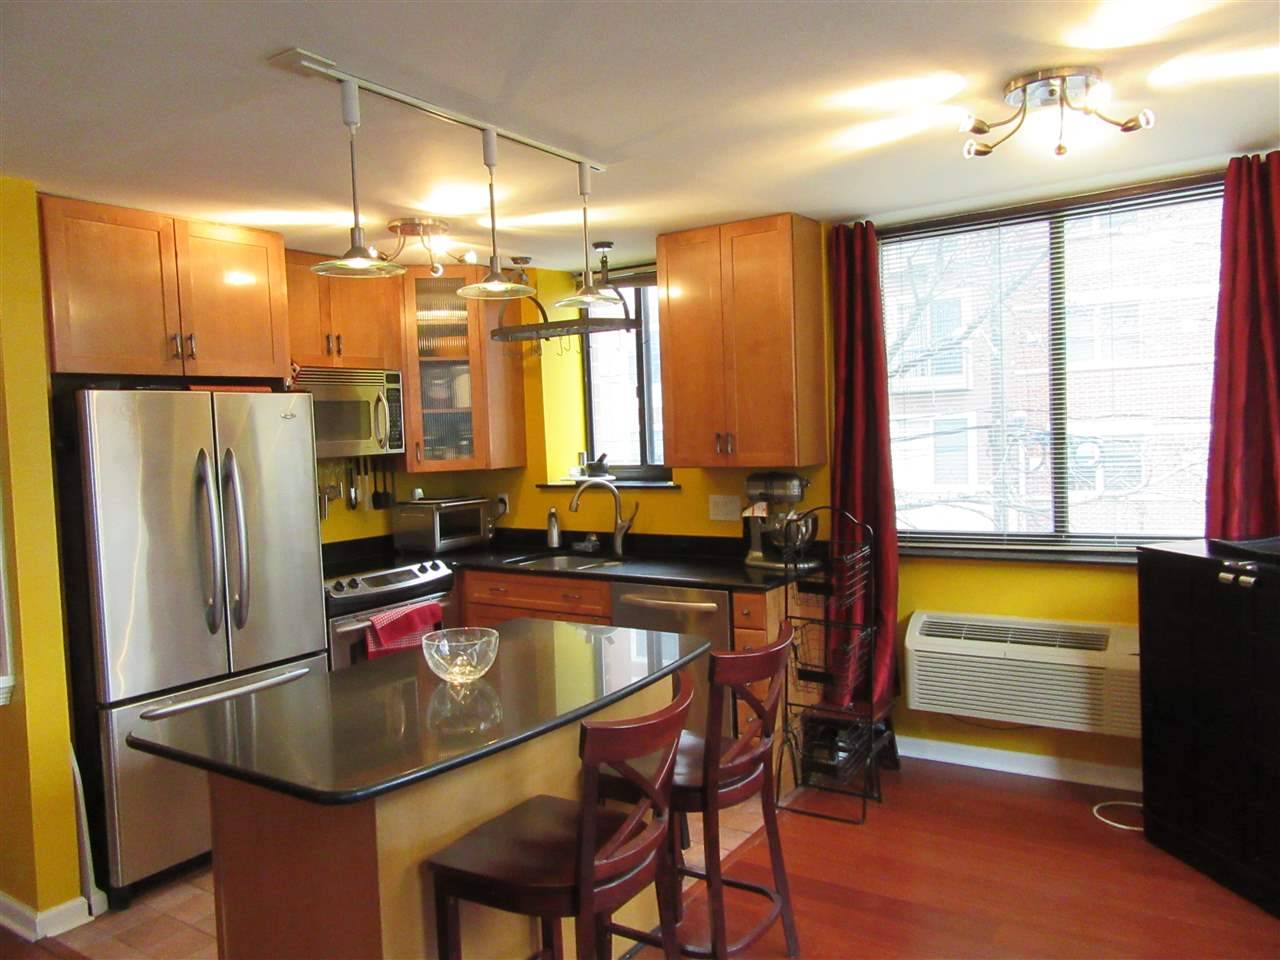 Check it out - 1 BR Condo Hoboken New Jersey